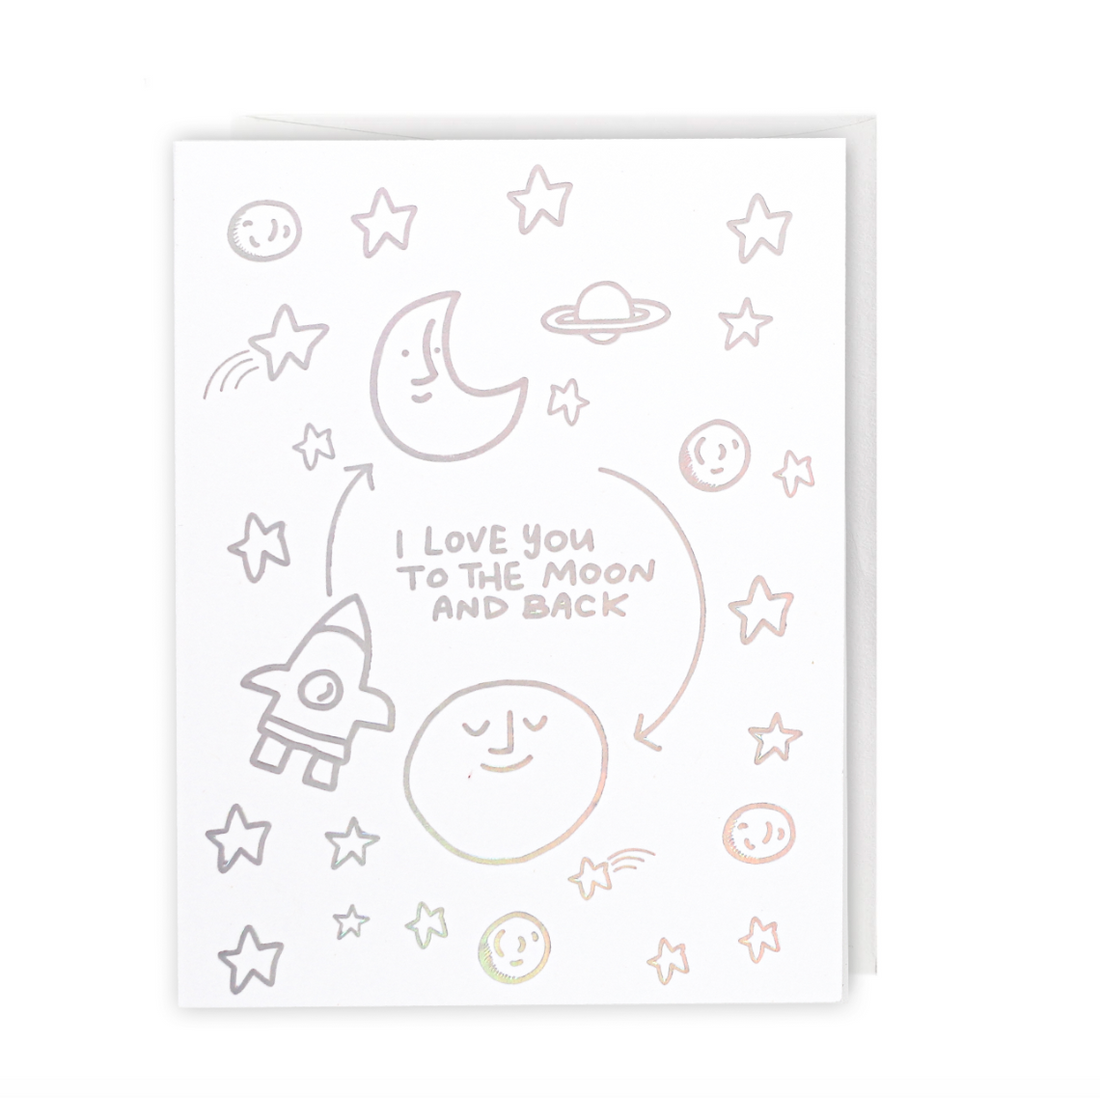 Valentines-Day-Gift-Ideas-Love-You-To-The-Moon-And-Back-Card